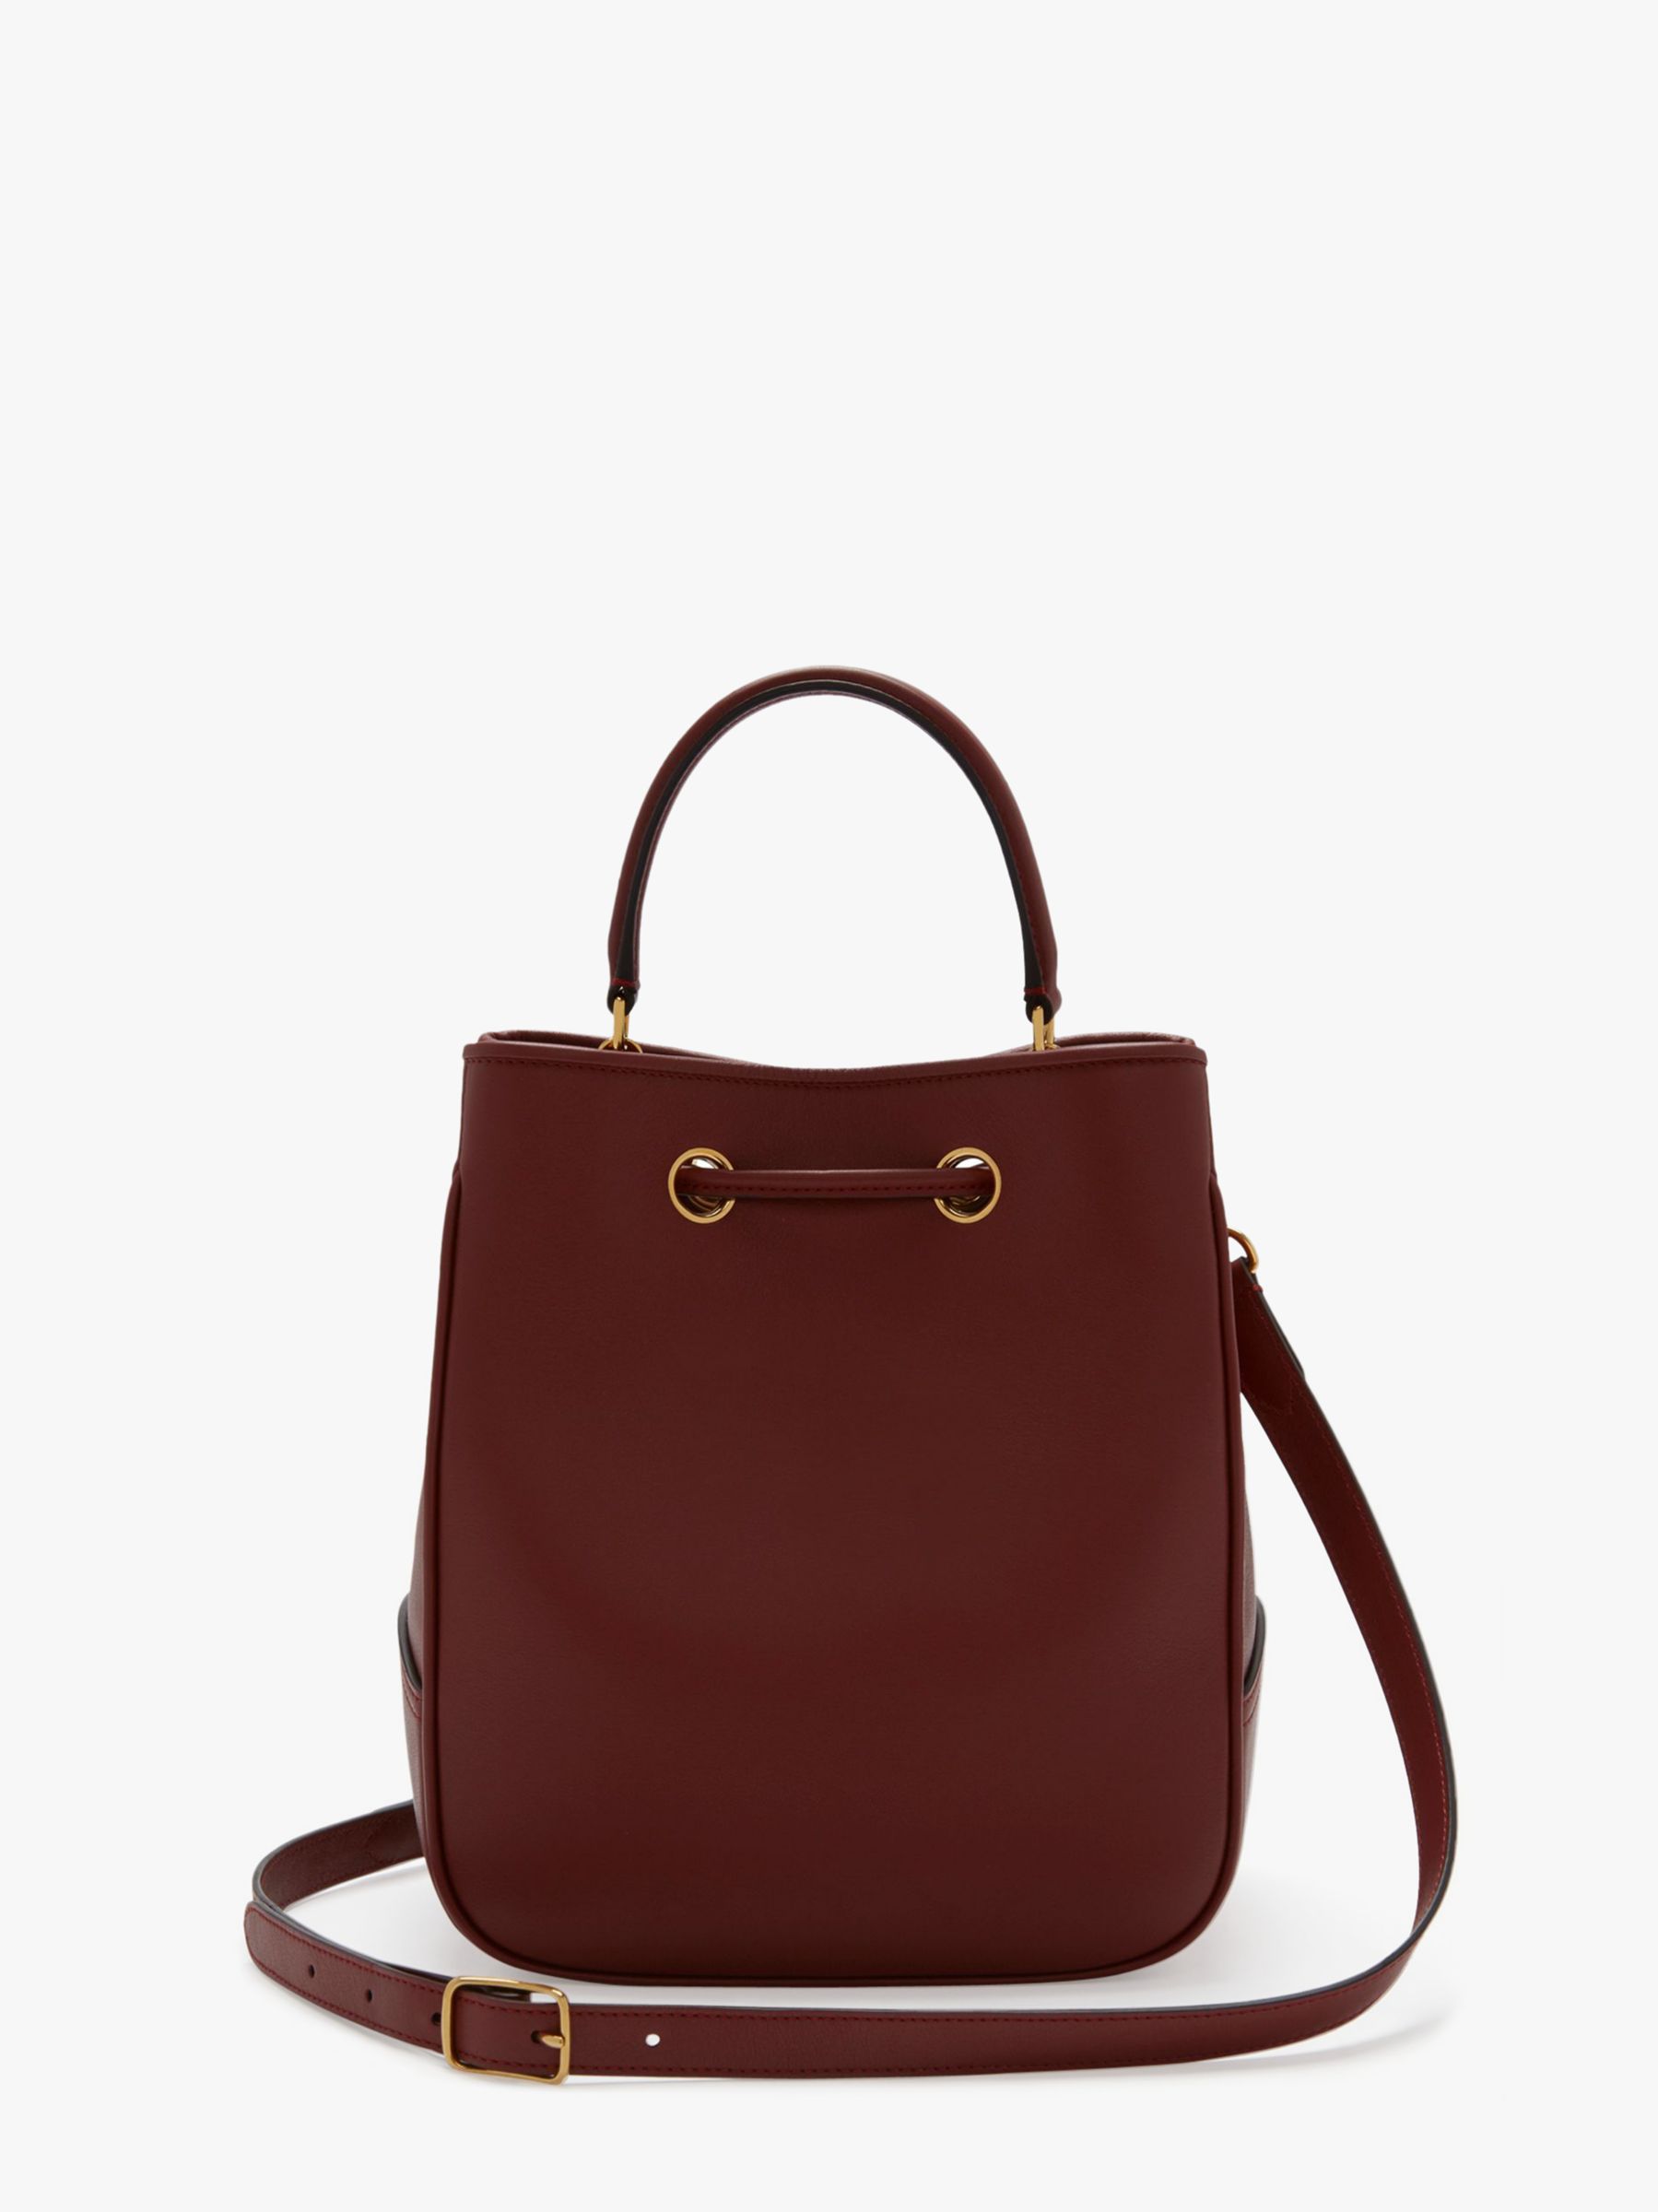 Mulberry Hampstead Woven Leather Shoulder Bag at John Lewis & Partners